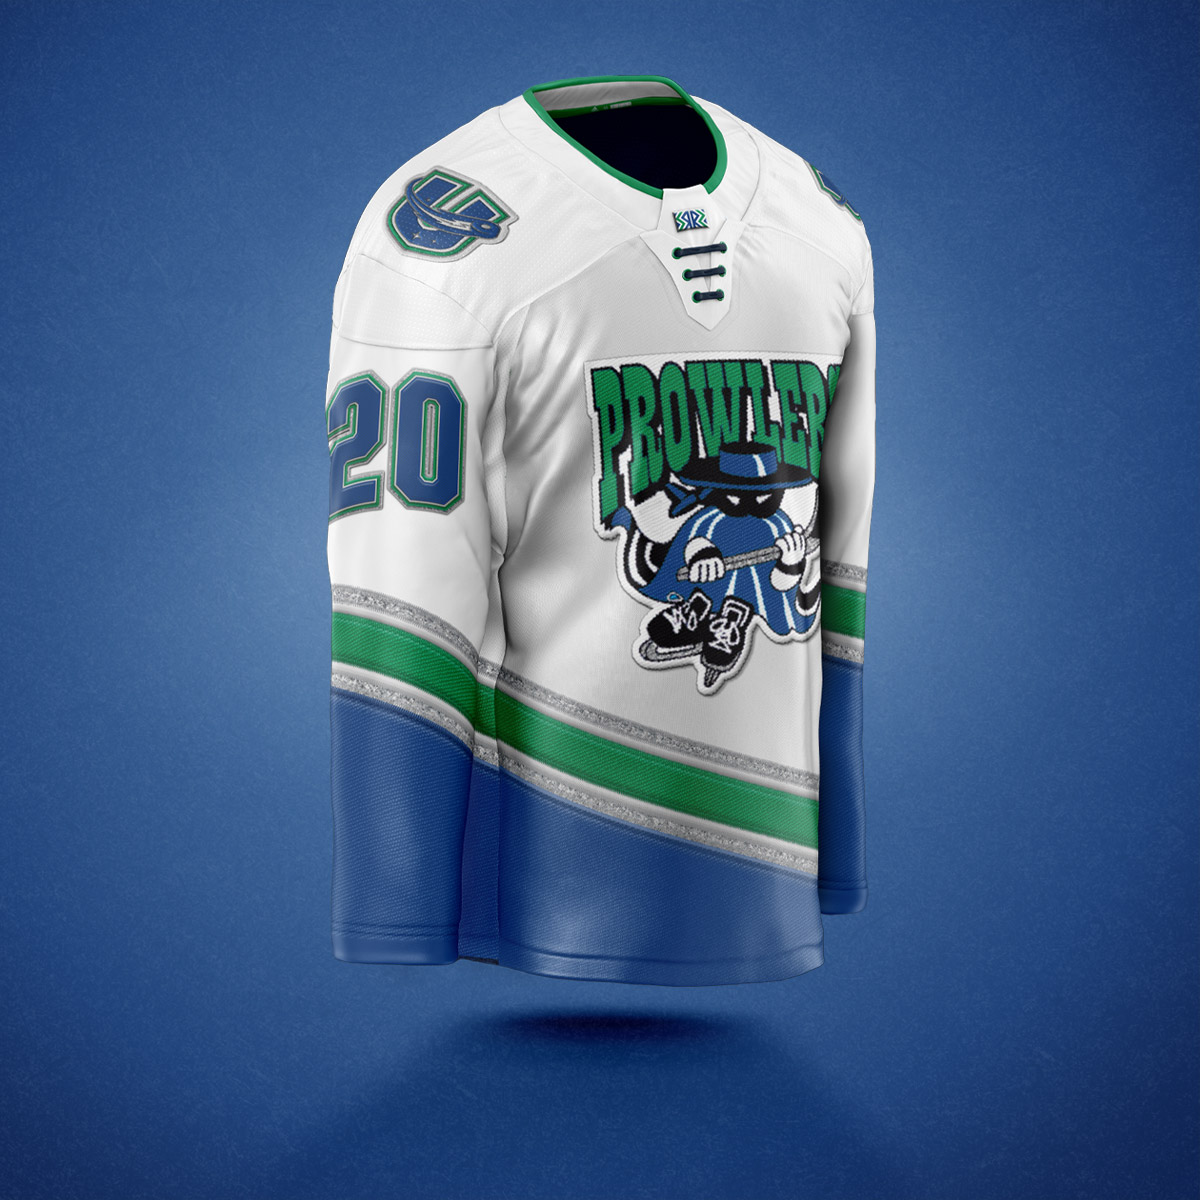 Comets looking forward to wearing special jerseys